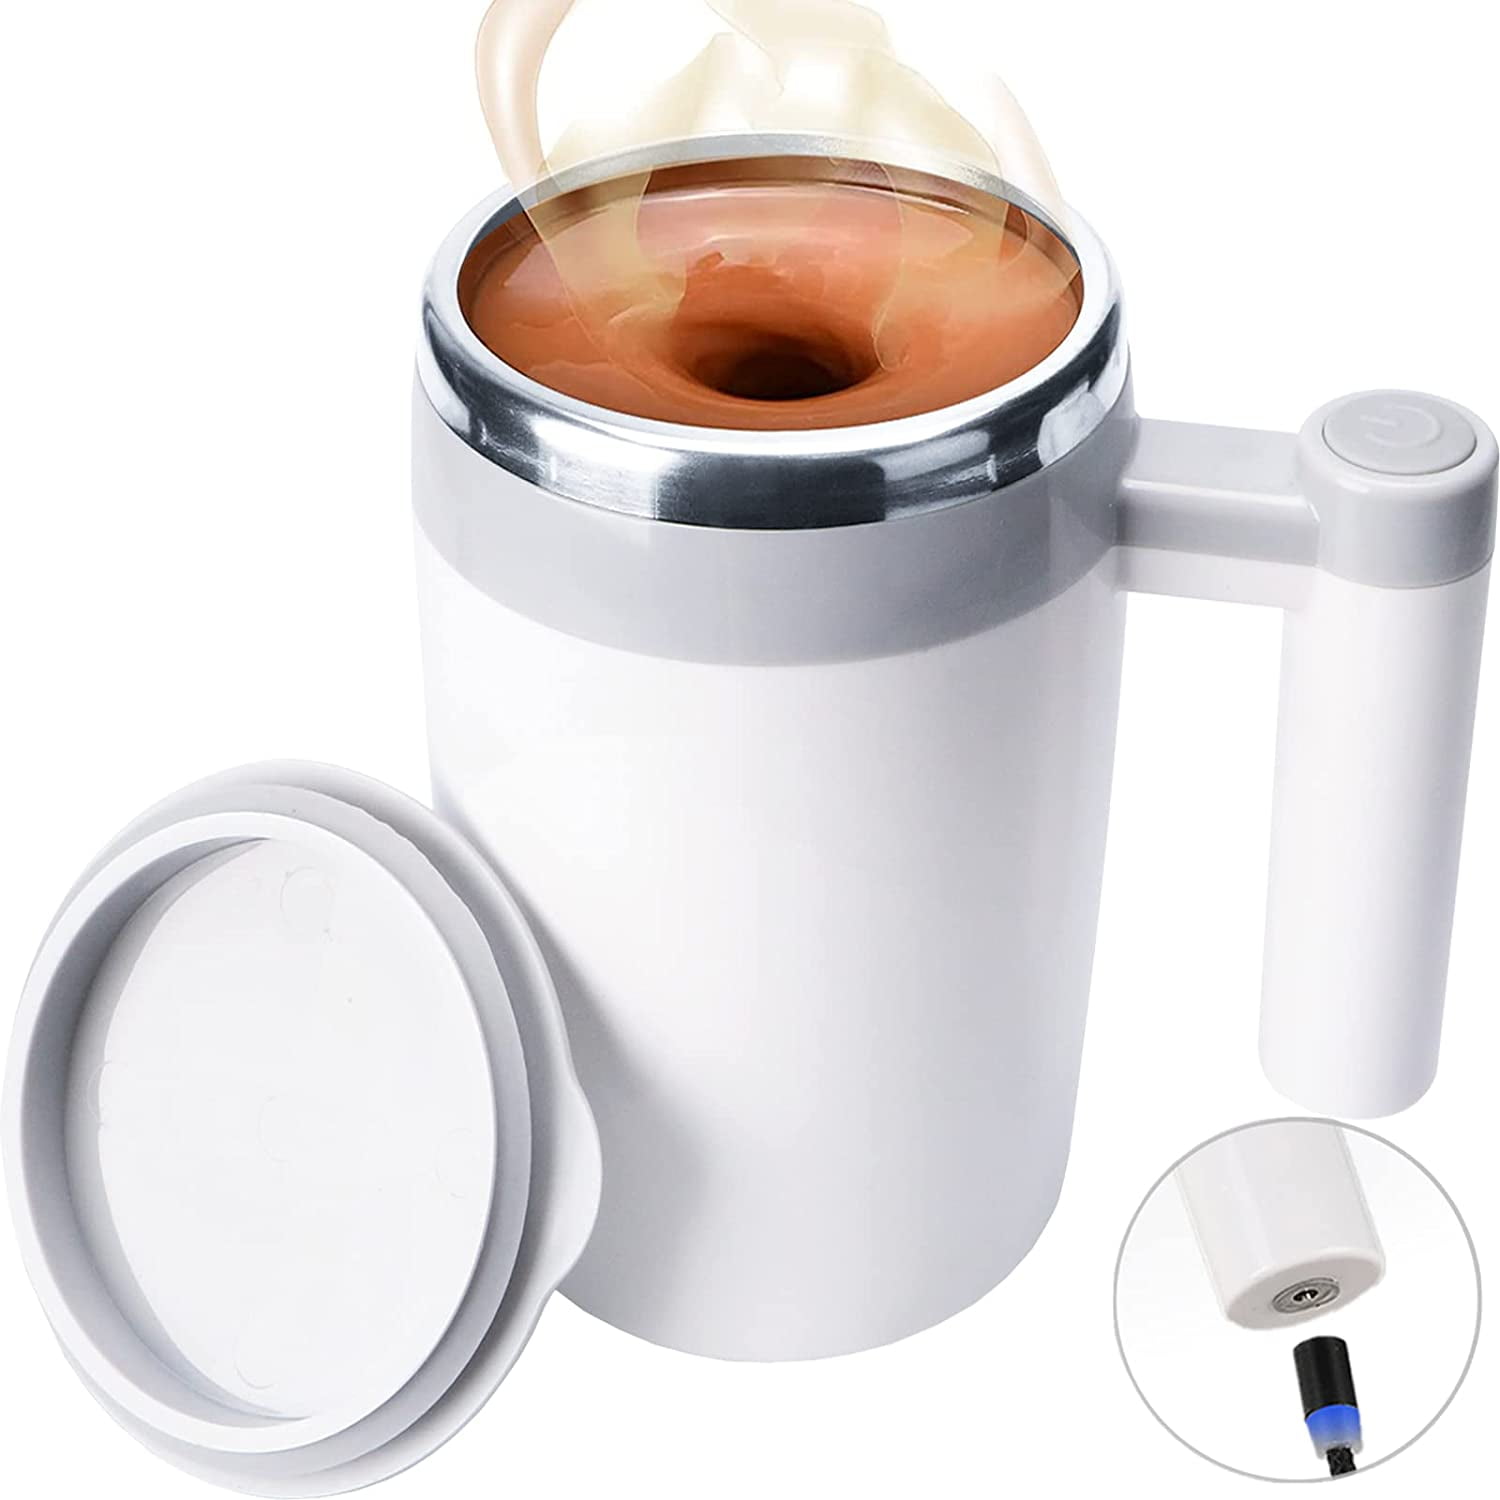 Self Stirring Mug With Lid Automatic Magnetic Stirring Coffee Cup – MIMSOUQ